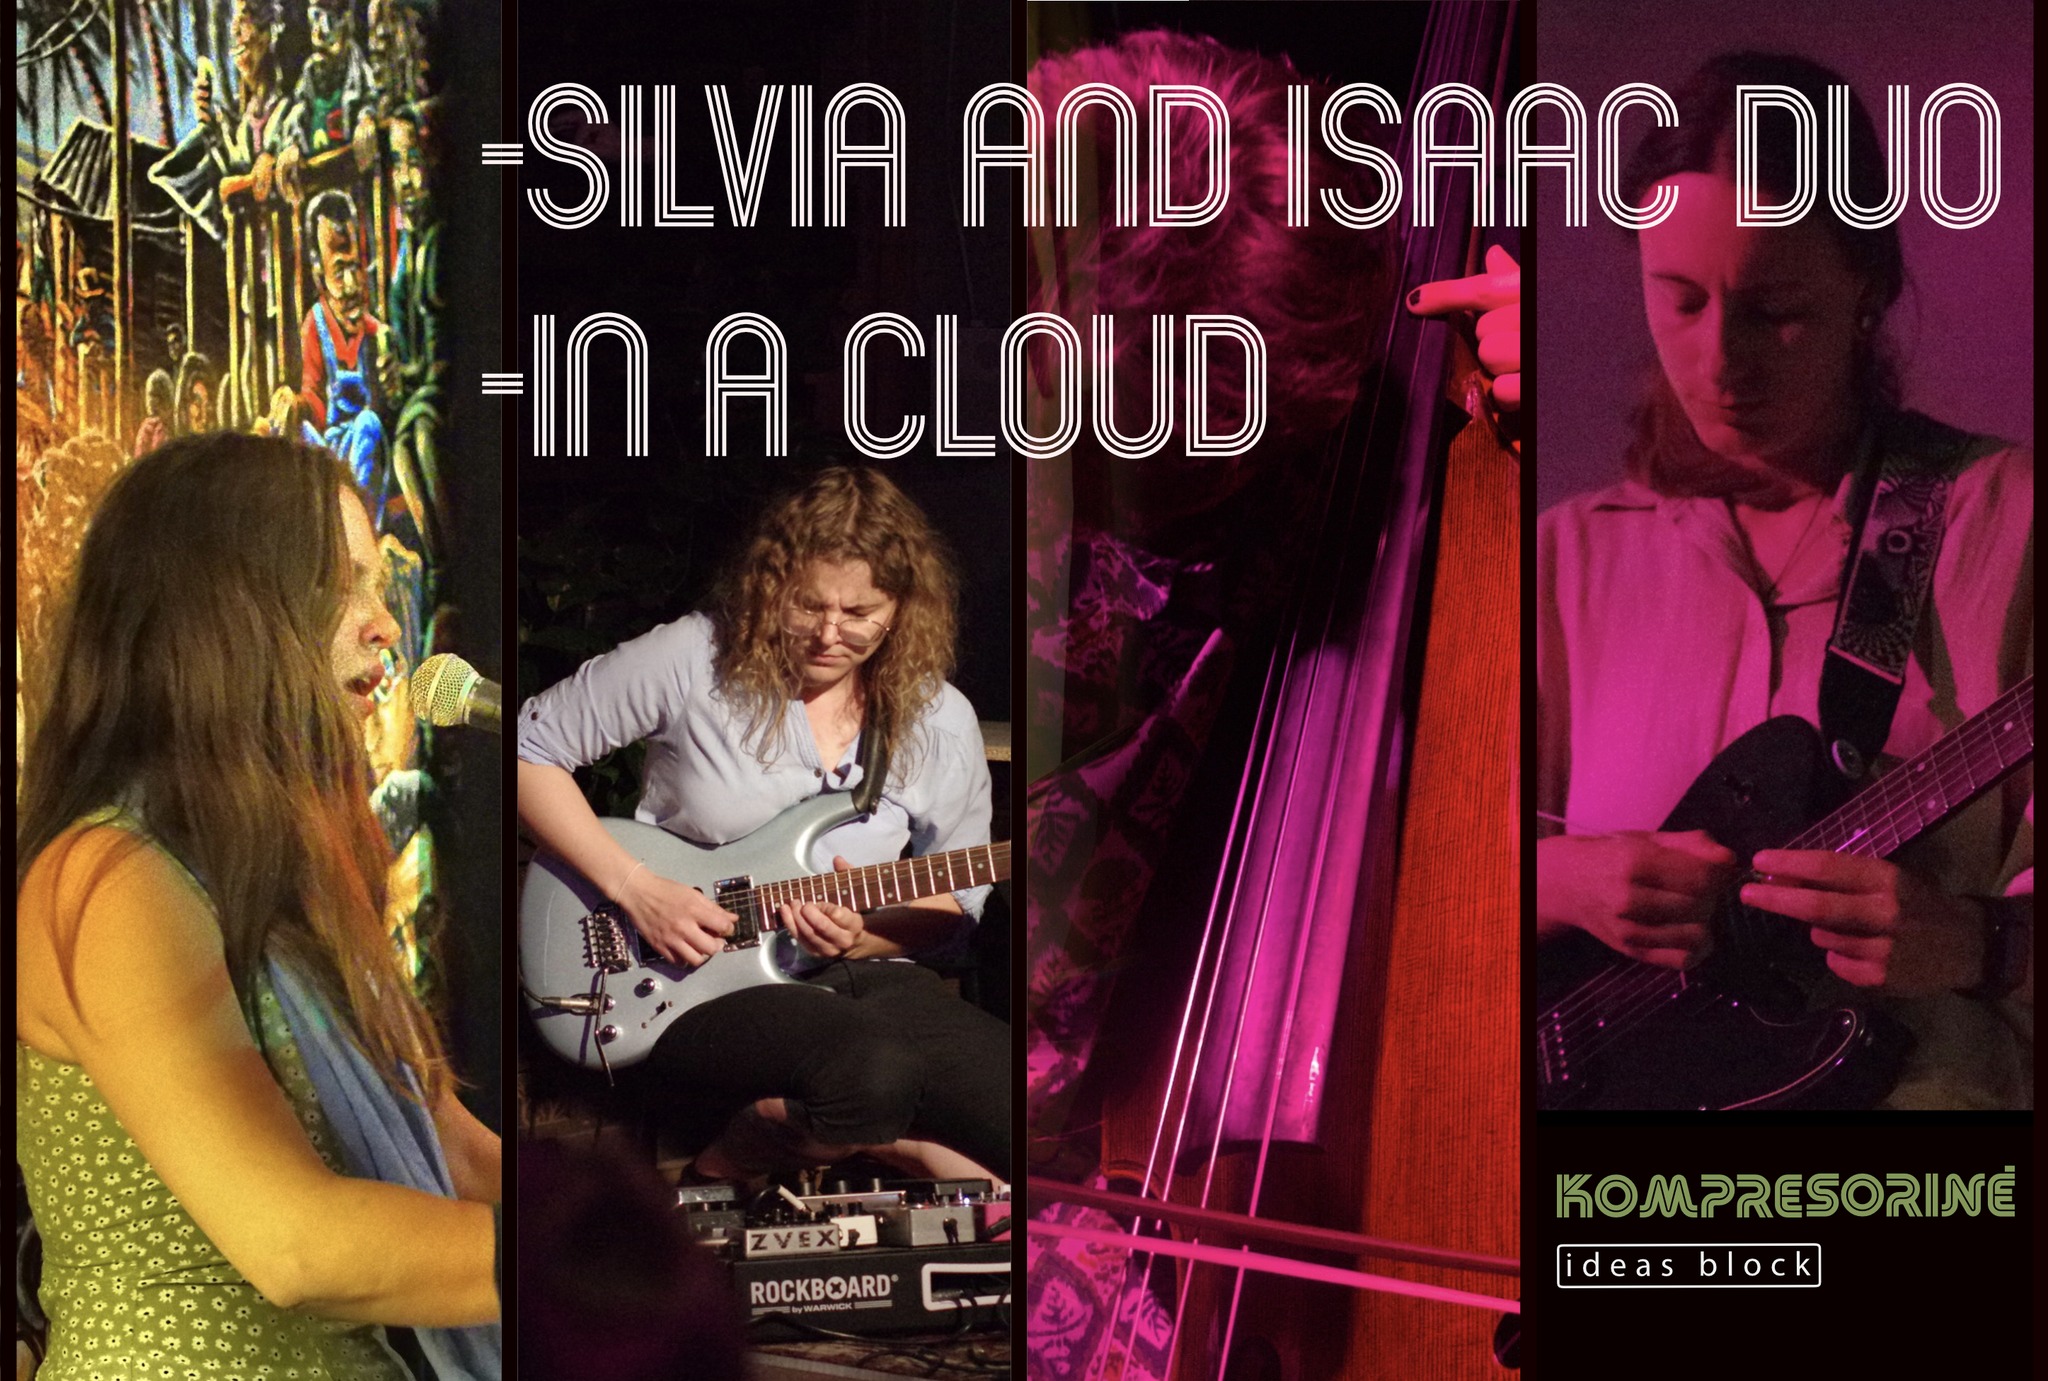 Silvia and isaac duo, in a cloud